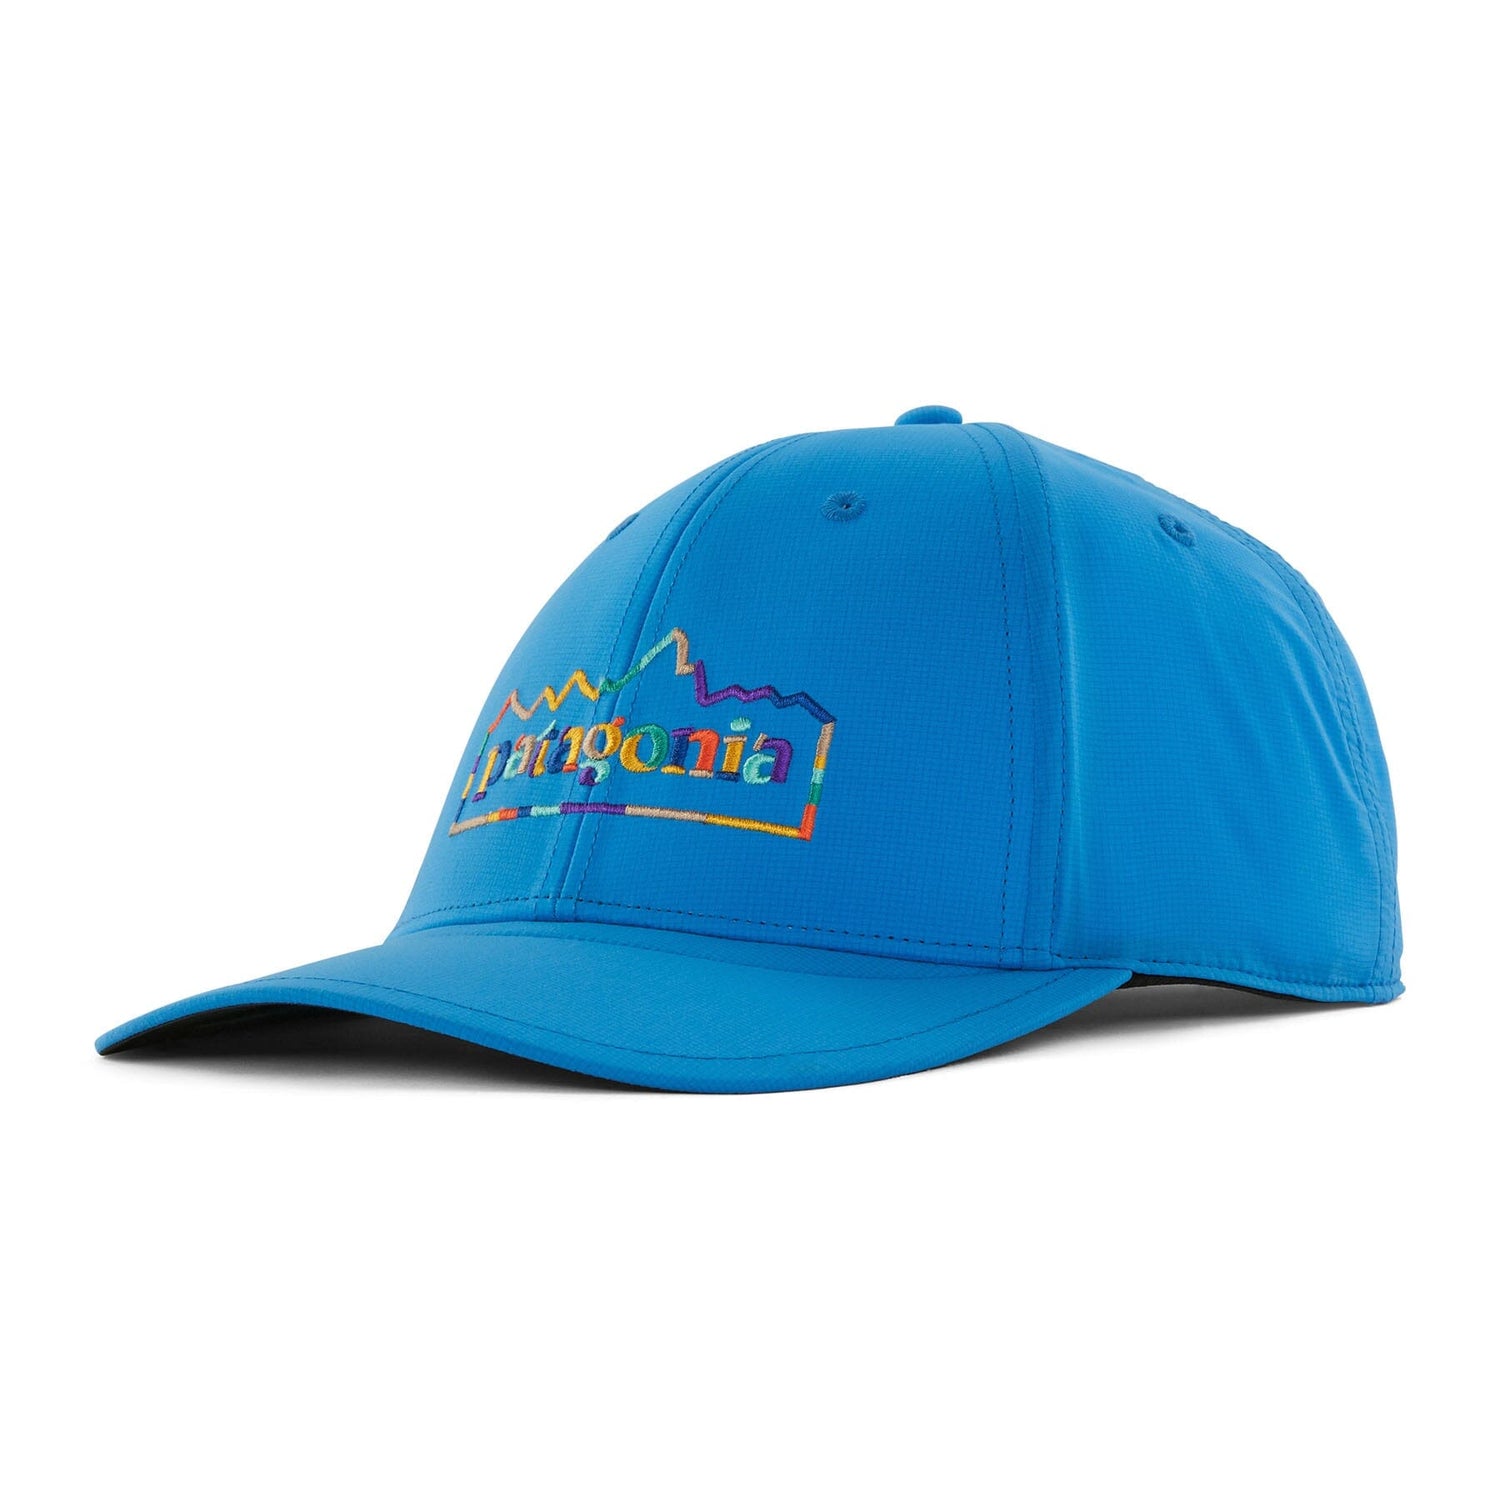 Patagonia Airshed Cap - 100% Recycled Polyester & NetPlus® Unity Fitz: Vessel Blue Headwear